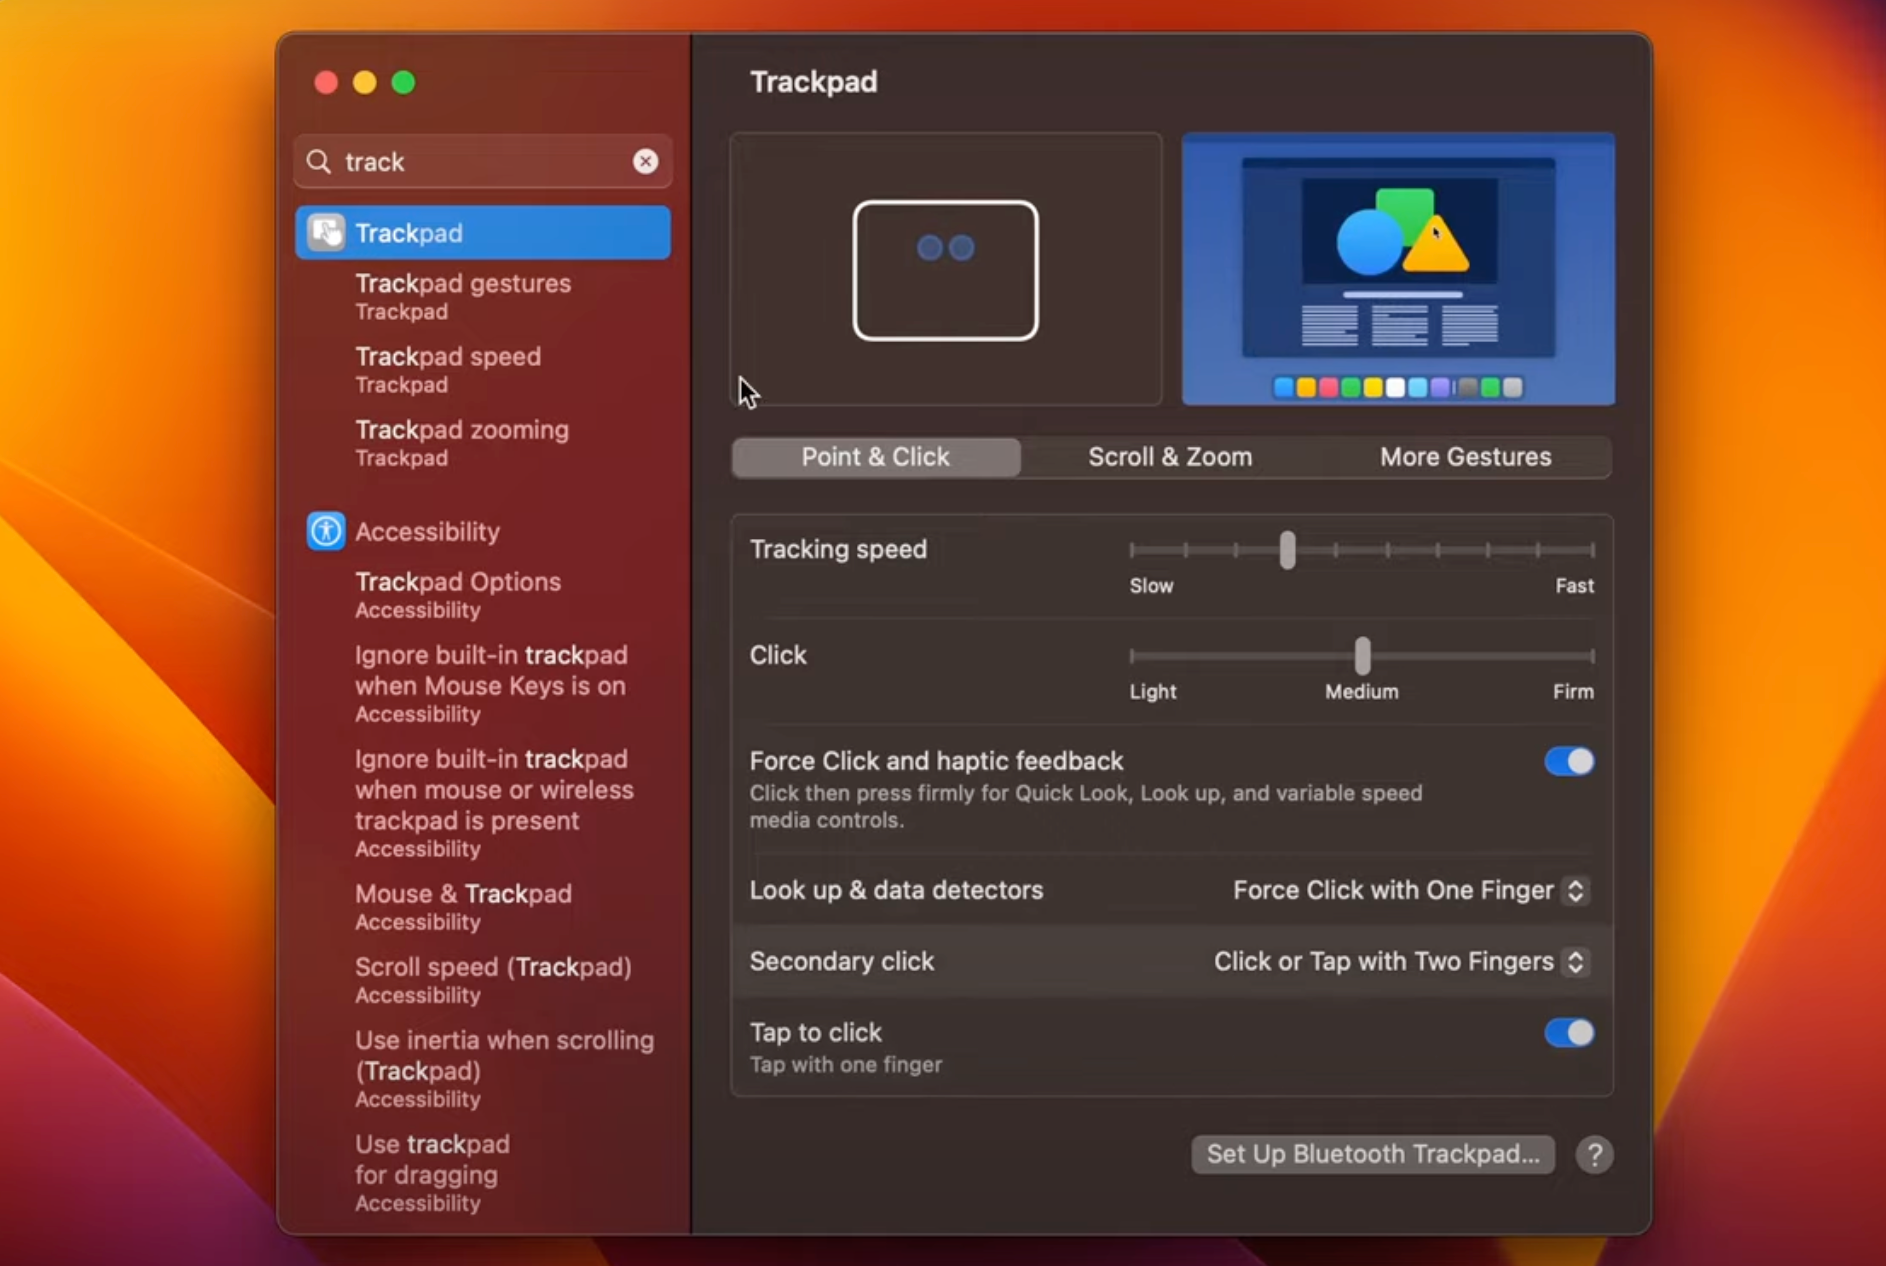 Enable Mac OS Tap to Click on Trackpad System Settings